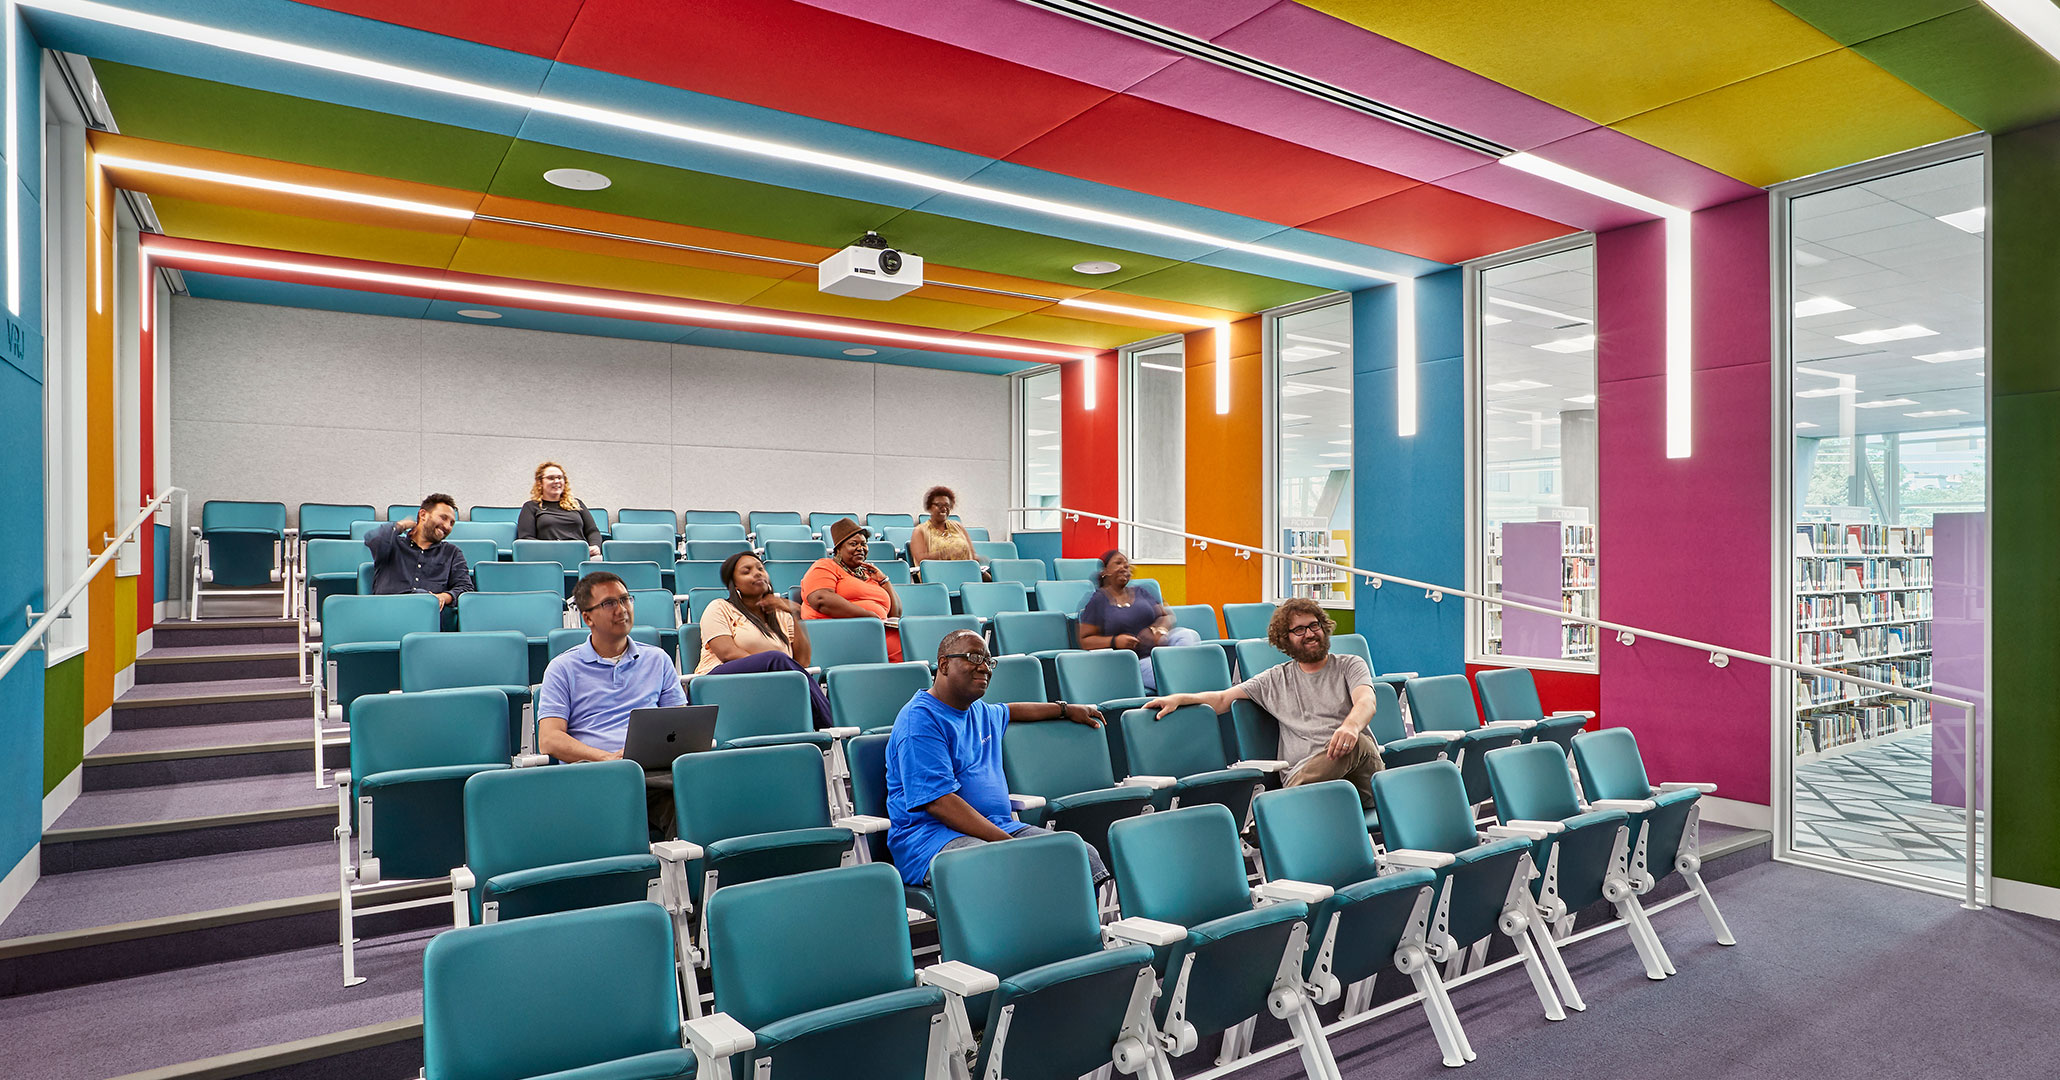 Richland County Library worked with Boudreaux architects to design colorful stadium seating theater for Richland Libraries.